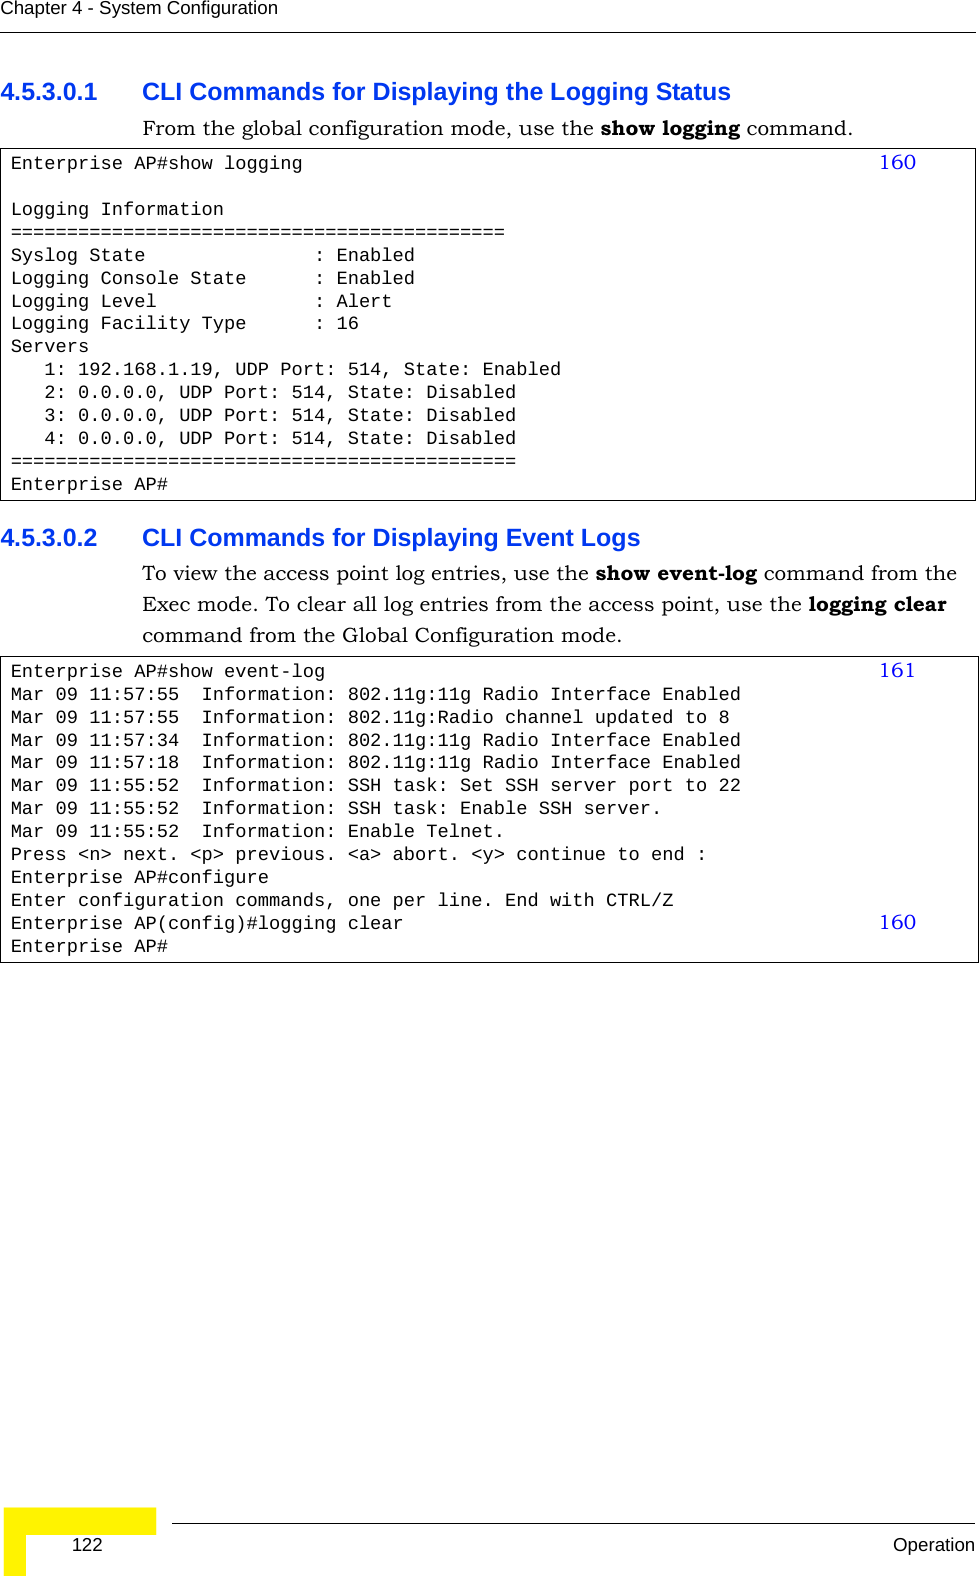  122 OperationChapter 4 - System Configuration4.5.3.0.1 CLI Commands for Displaying the Logging Status From the global configuration mode, use the show logging command.4.5.3.0.2 CLI Commands for Displaying Event LogsTo view the access point log entries, use the show event-log command from the Exec mode. To clear all log entries from the access point, use the logging clear command from the Global Configuration mode.Enterprise AP#show logging 160Logging Information============================================Syslog State               : EnabledLogging Console State      : EnabledLogging Level              : AlertLogging Facility Type      : 16Servers   1: 192.168.1.19, UDP Port: 514, State: Enabled   2: 0.0.0.0, UDP Port: 514, State: Disabled   3: 0.0.0.0, UDP Port: 514, State: Disabled   4: 0.0.0.0, UDP Port: 514, State: Disabled=============================================Enterprise AP#Enterprise AP#show event-log 161Mar 09 11:57:55  Information: 802.11g:11g Radio Interface EnabledMar 09 11:57:55  Information: 802.11g:Radio channel updated to 8Mar 09 11:57:34  Information: 802.11g:11g Radio Interface EnabledMar 09 11:57:18  Information: 802.11g:11g Radio Interface EnabledMar 09 11:55:52  Information: SSH task: Set SSH server port to 22Mar 09 11:55:52  Information: SSH task: Enable SSH server.Mar 09 11:55:52  Information: Enable Telnet.Press &lt;n&gt; next. &lt;p&gt; previous. &lt;a&gt; abort. &lt;y&gt; continue to end :Enterprise AP#configureEnter configuration commands, one per line. End with CTRL/ZEnterprise AP(config)#logging clear 160Enterprise AP#